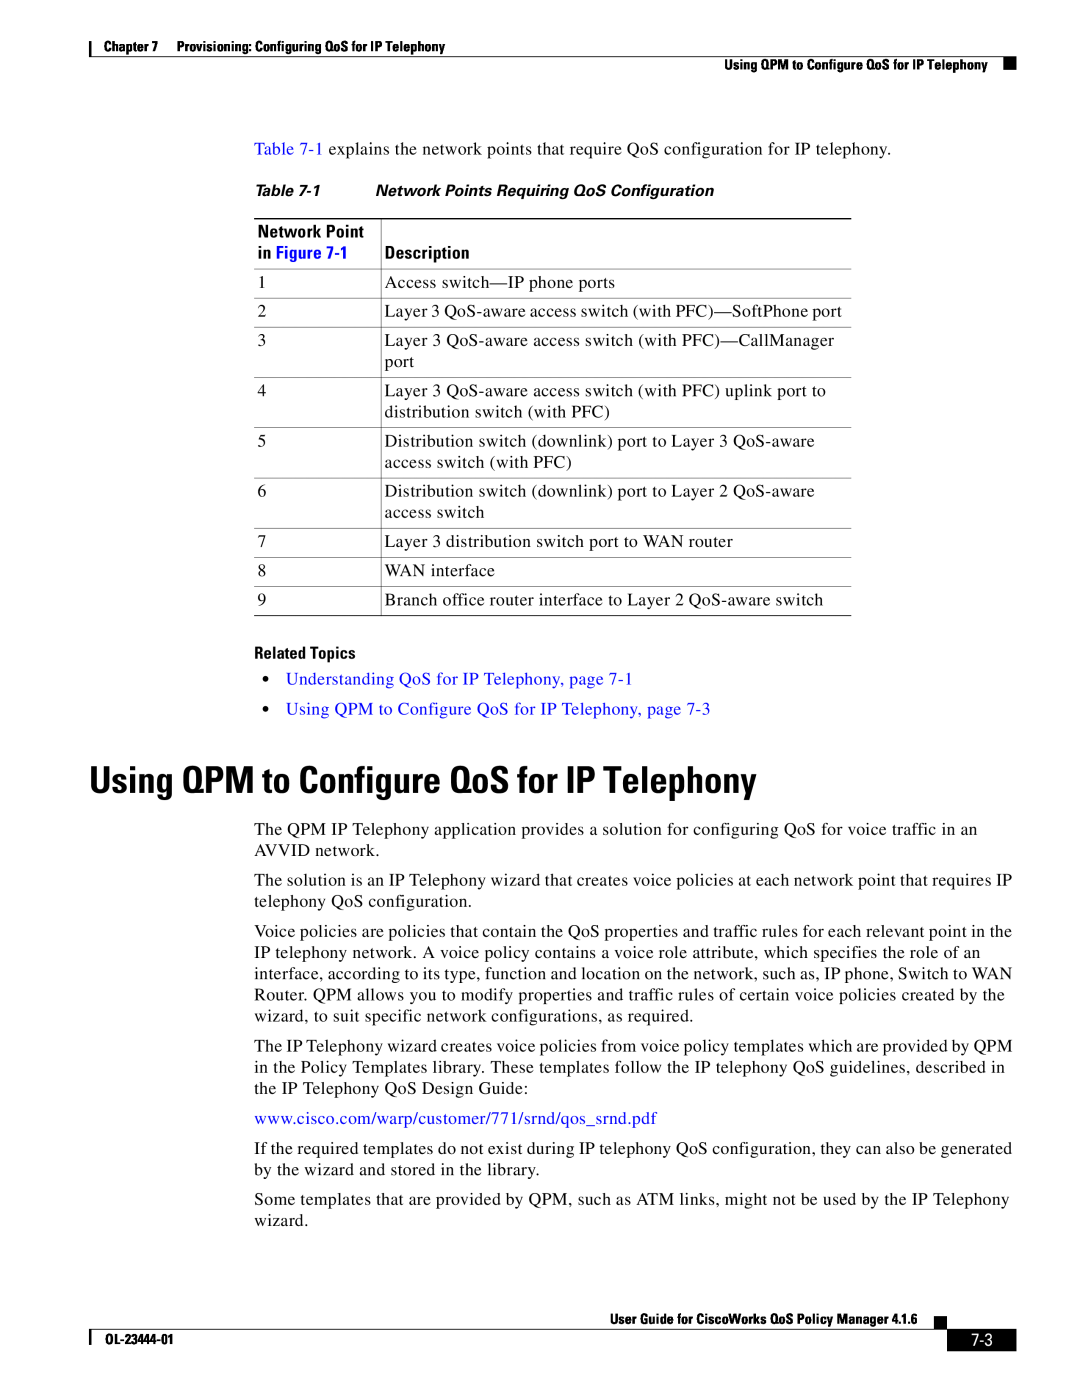 Cisco Systems 416 manual Using QPM to Configure QoS for IP Telephony, Description, in Figure, Related Topics 